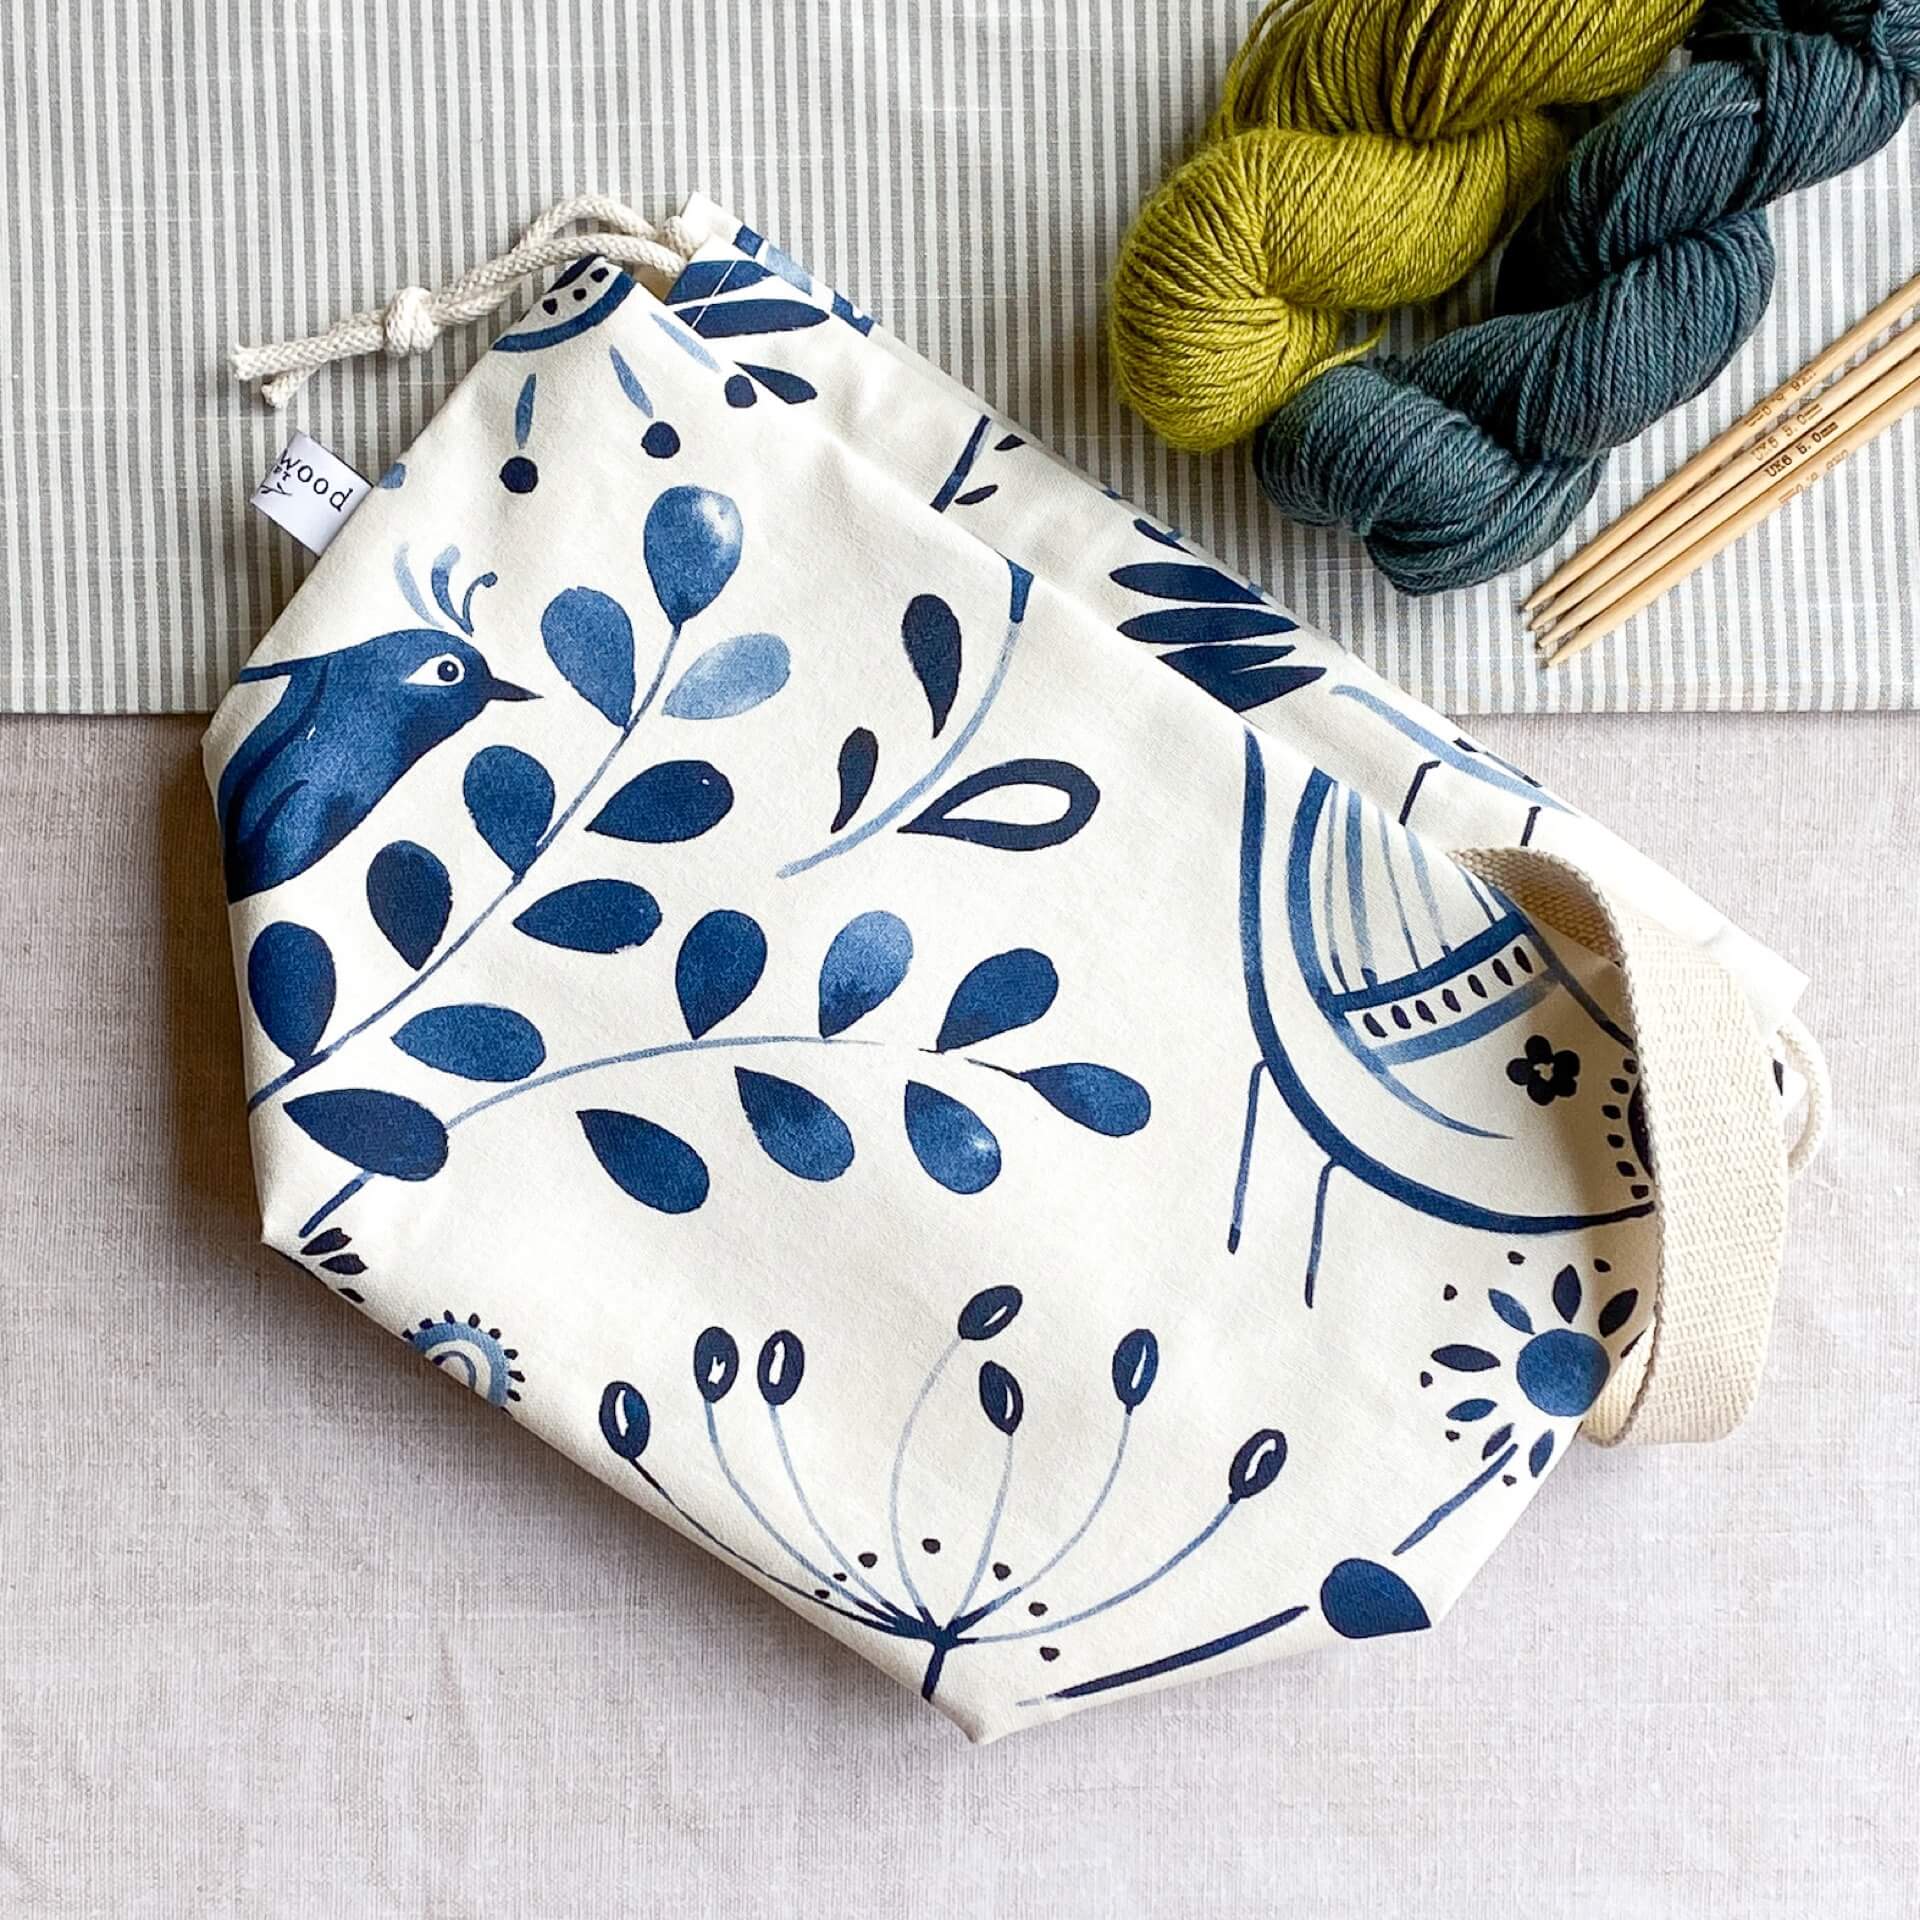 An indigo-colored folk art print knitting project bag placed on a table. Above the bag, two colorful skeins of yarn are neatly arranged next to wooden knitting needles. The bag features a vibrant and intricate folk art design on its fabric.